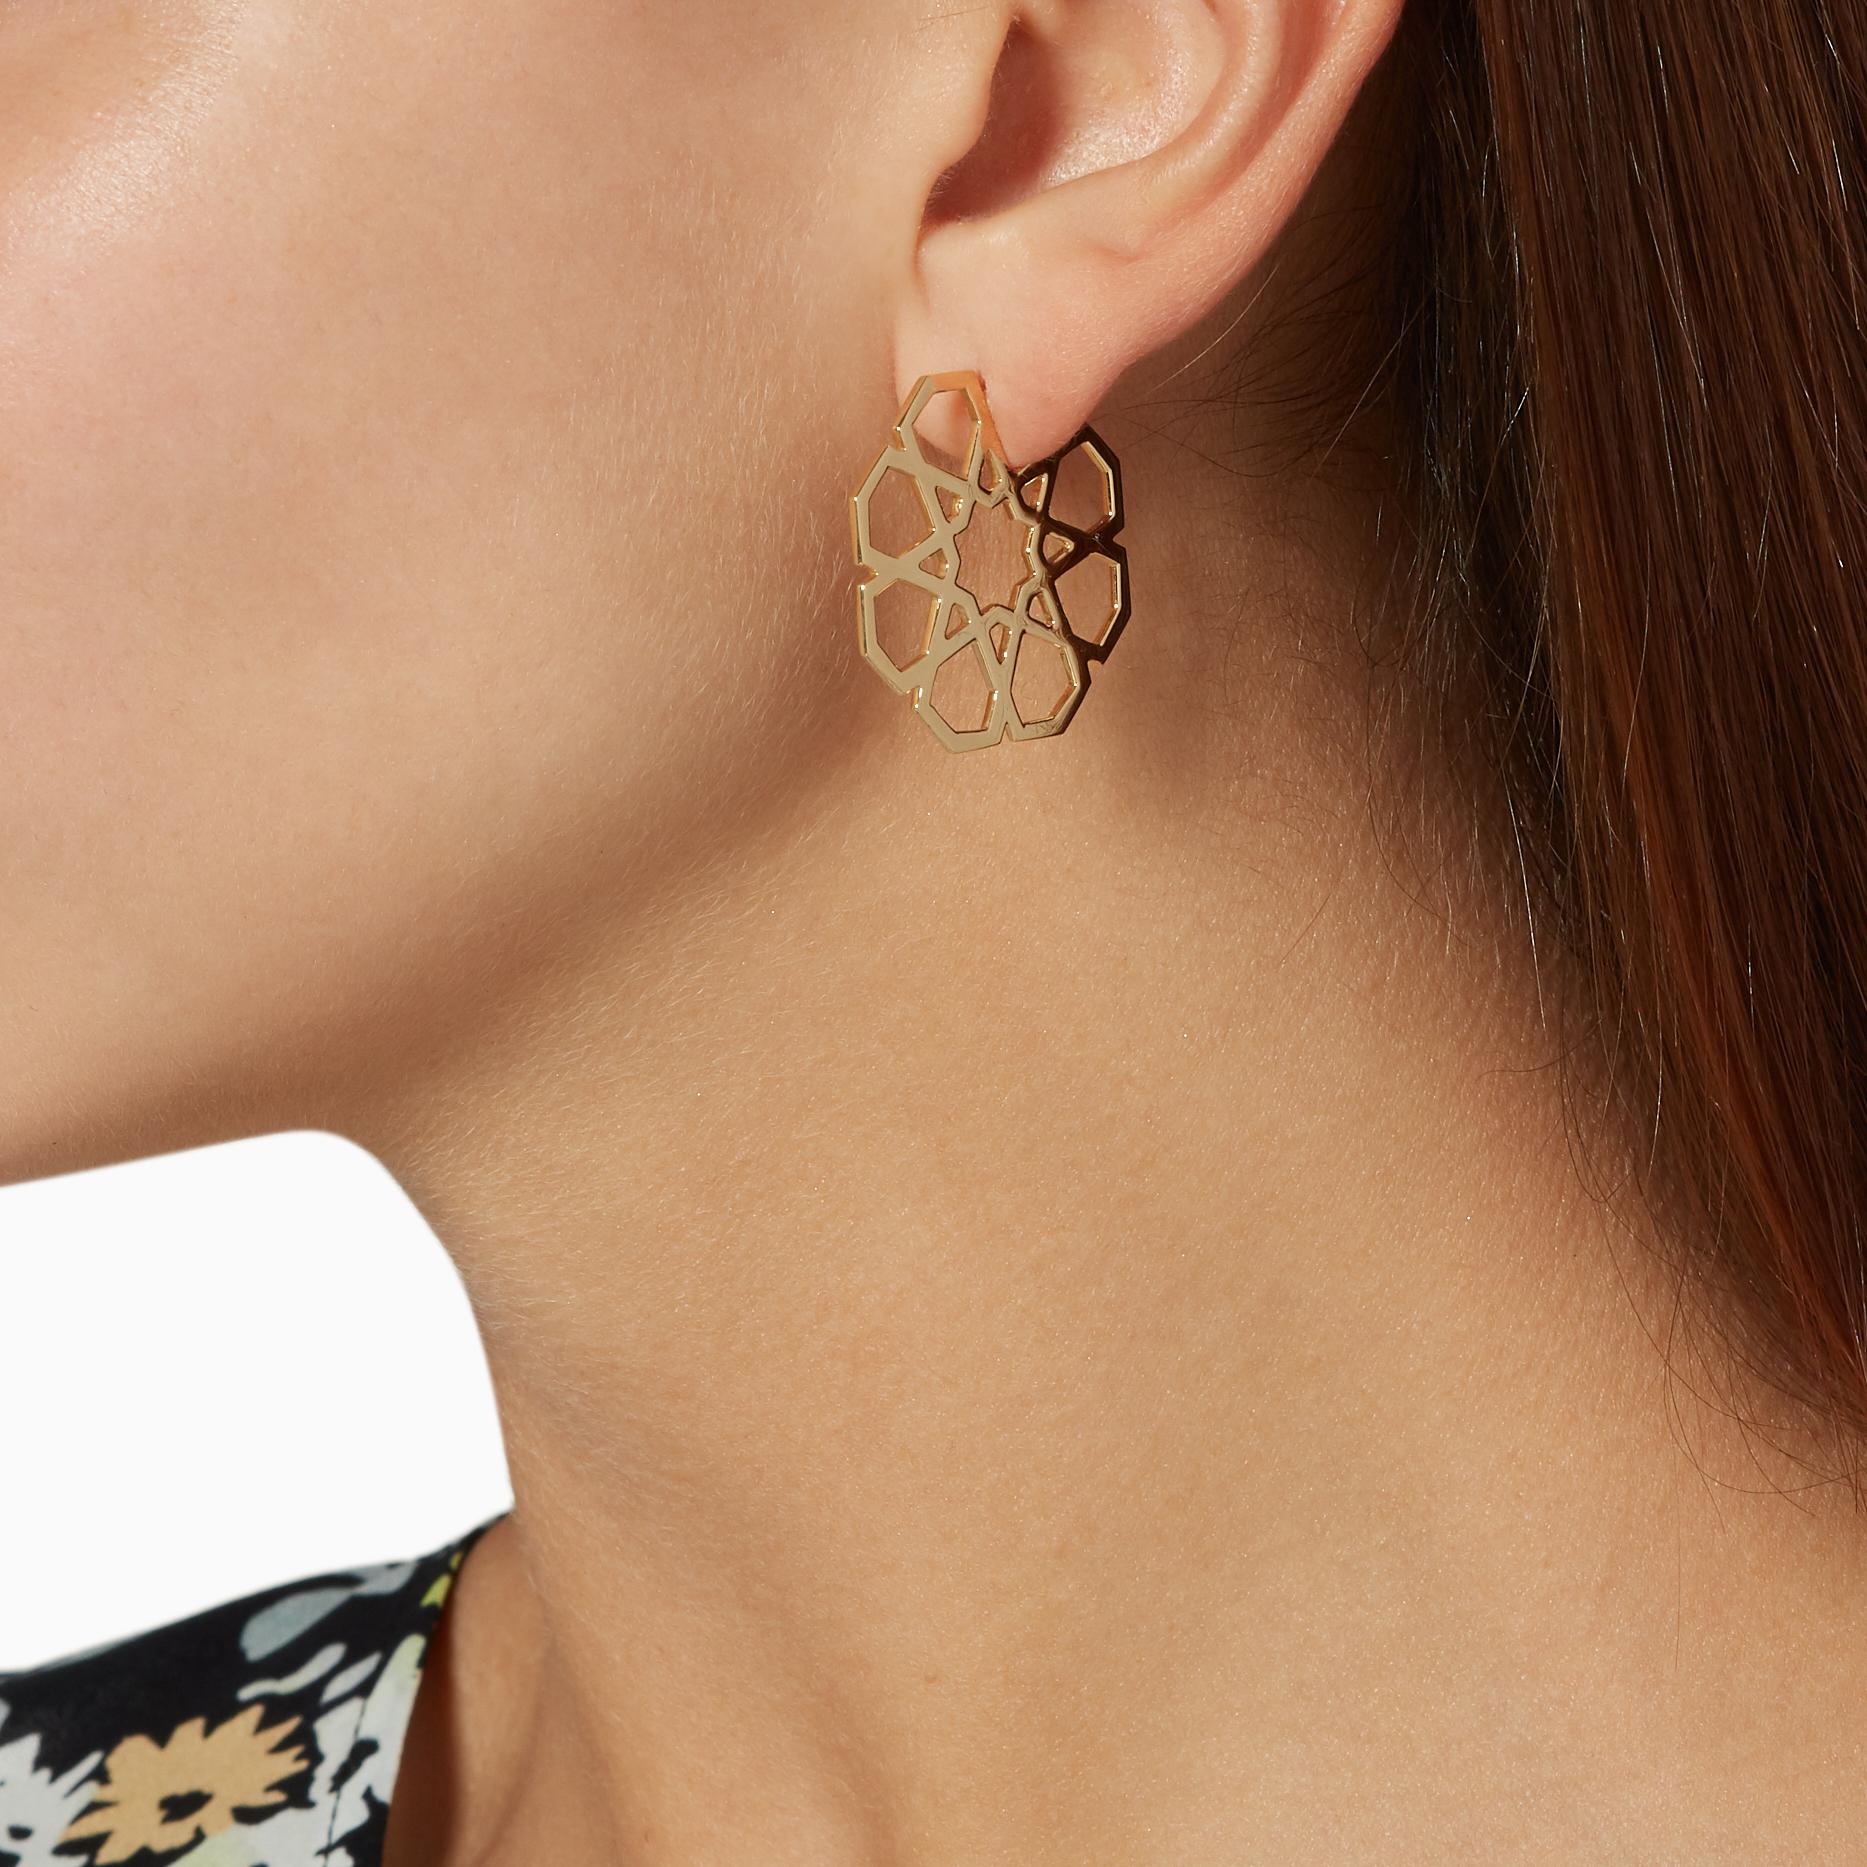 18kt yellow gold earrings from Ralph Masri's Arabesque Deco collection, inspired by Middle Eastern patterns and motifs infused with an Art Deco touch.

Available in yellow, rose or white gold.

Push backs for pierced earrings.